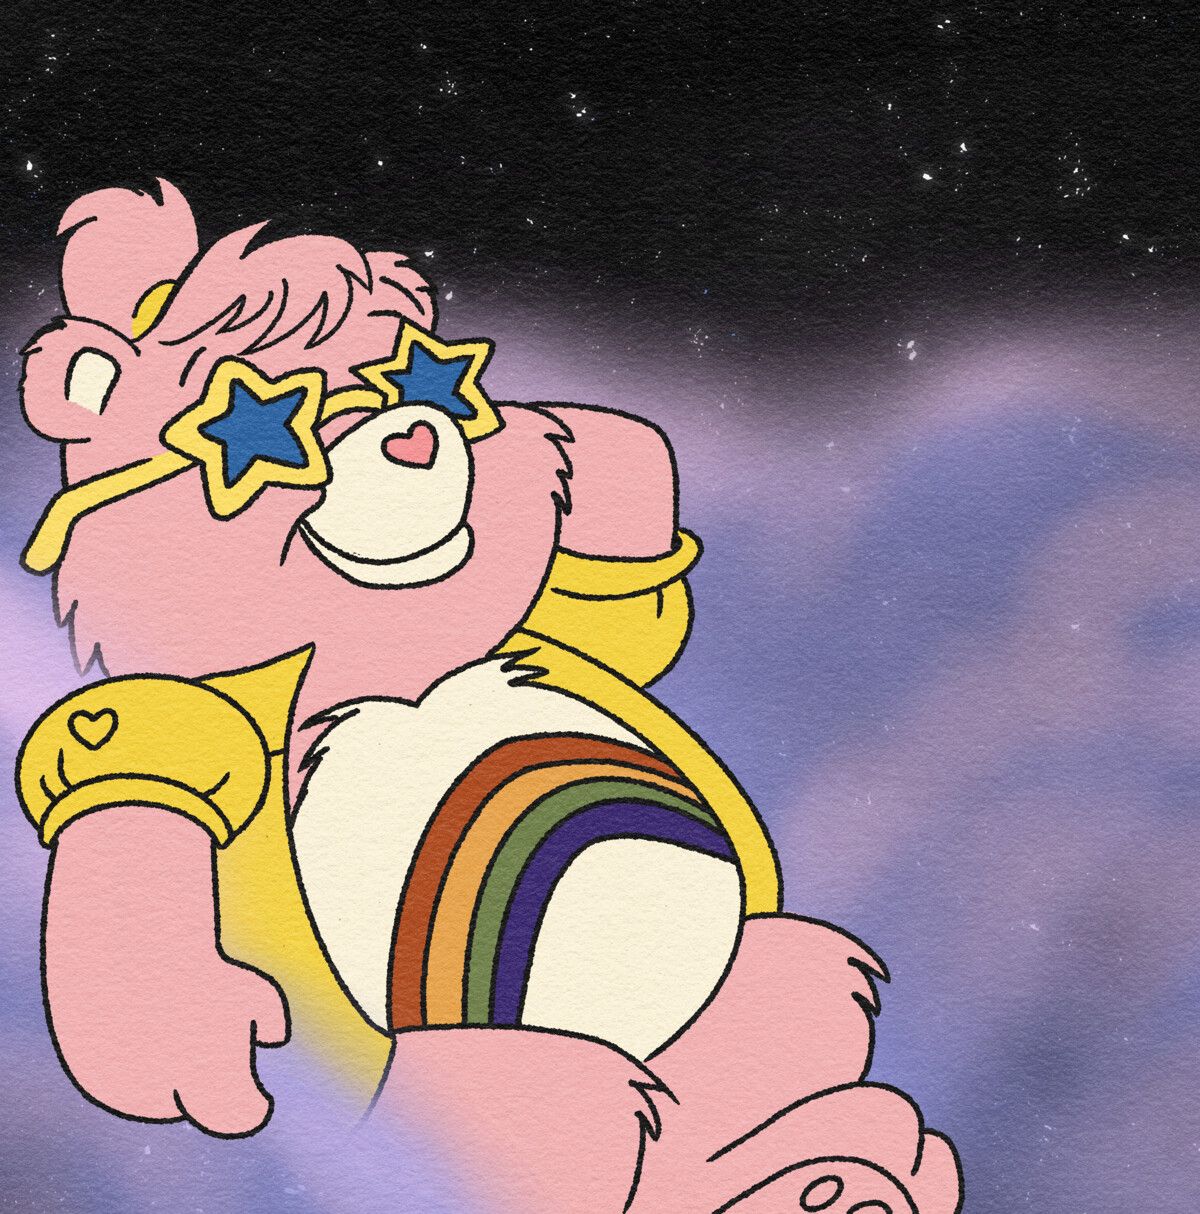 A pink bear with rainbow hair and a rainbow bow tie, standing in front of a starry sky. - Care Bears